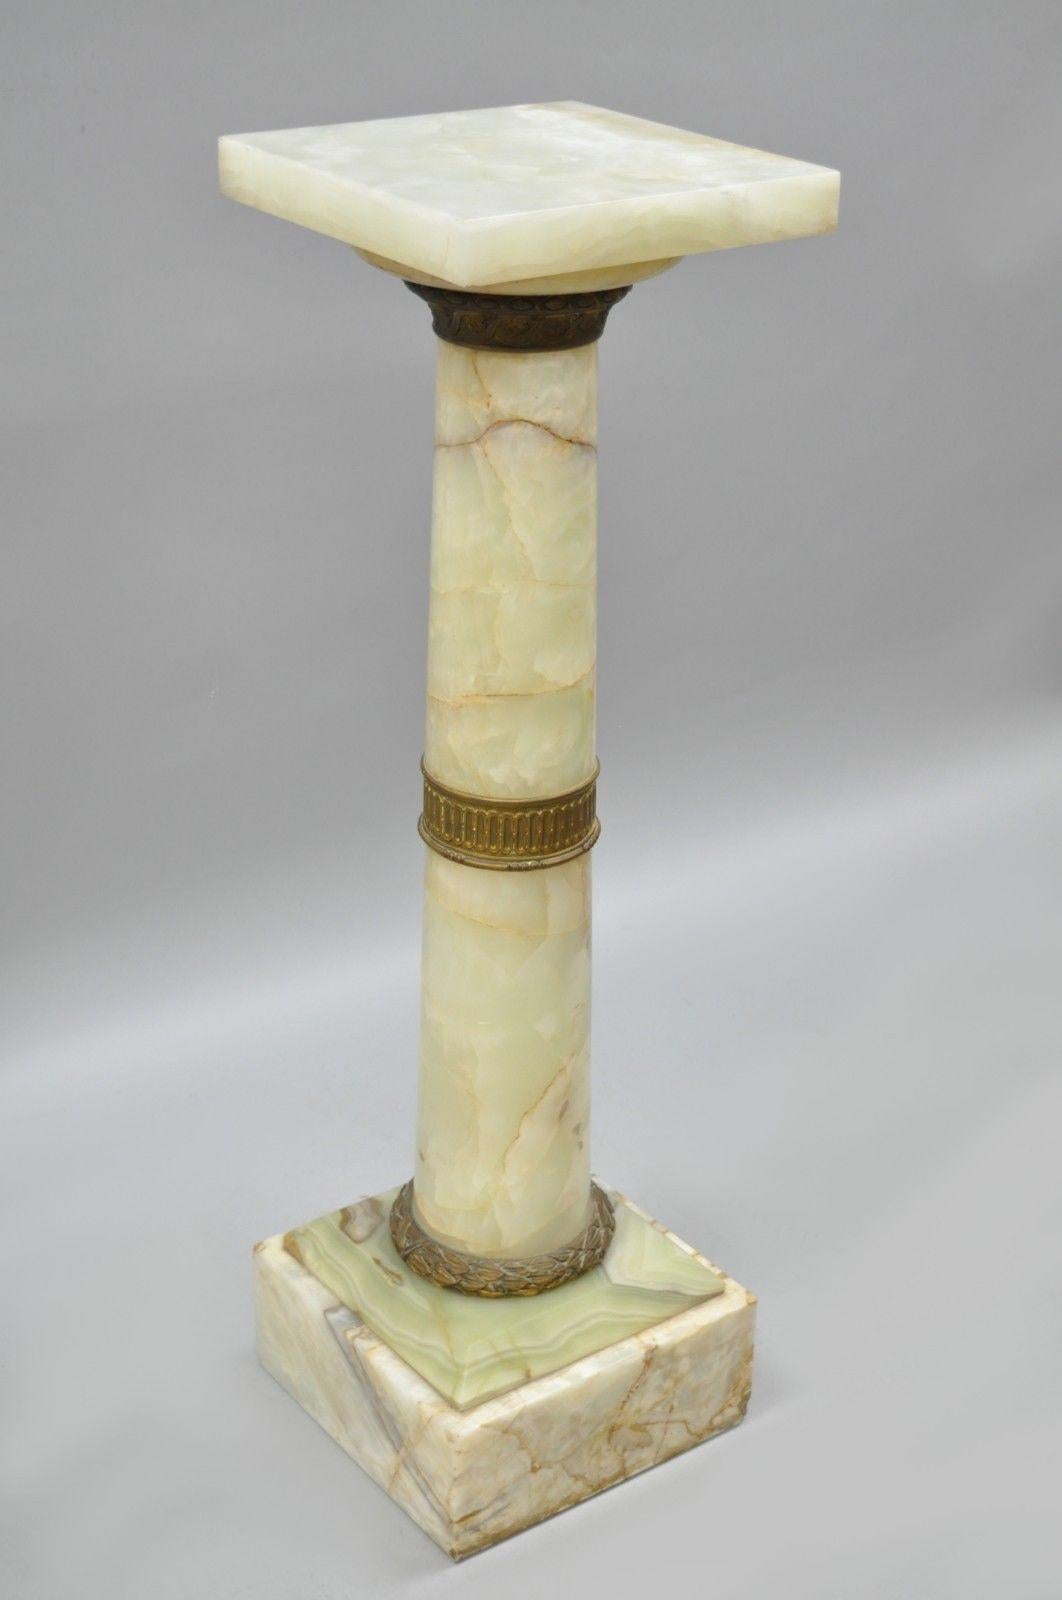 Antique 19th century bronze & onyx column revolving pedestal in the French Empire style. Item features revolving top, bronze ormolu, beautiful green and beige onyx stone and timeless Classical form, circa 19th century. Measurements: 42